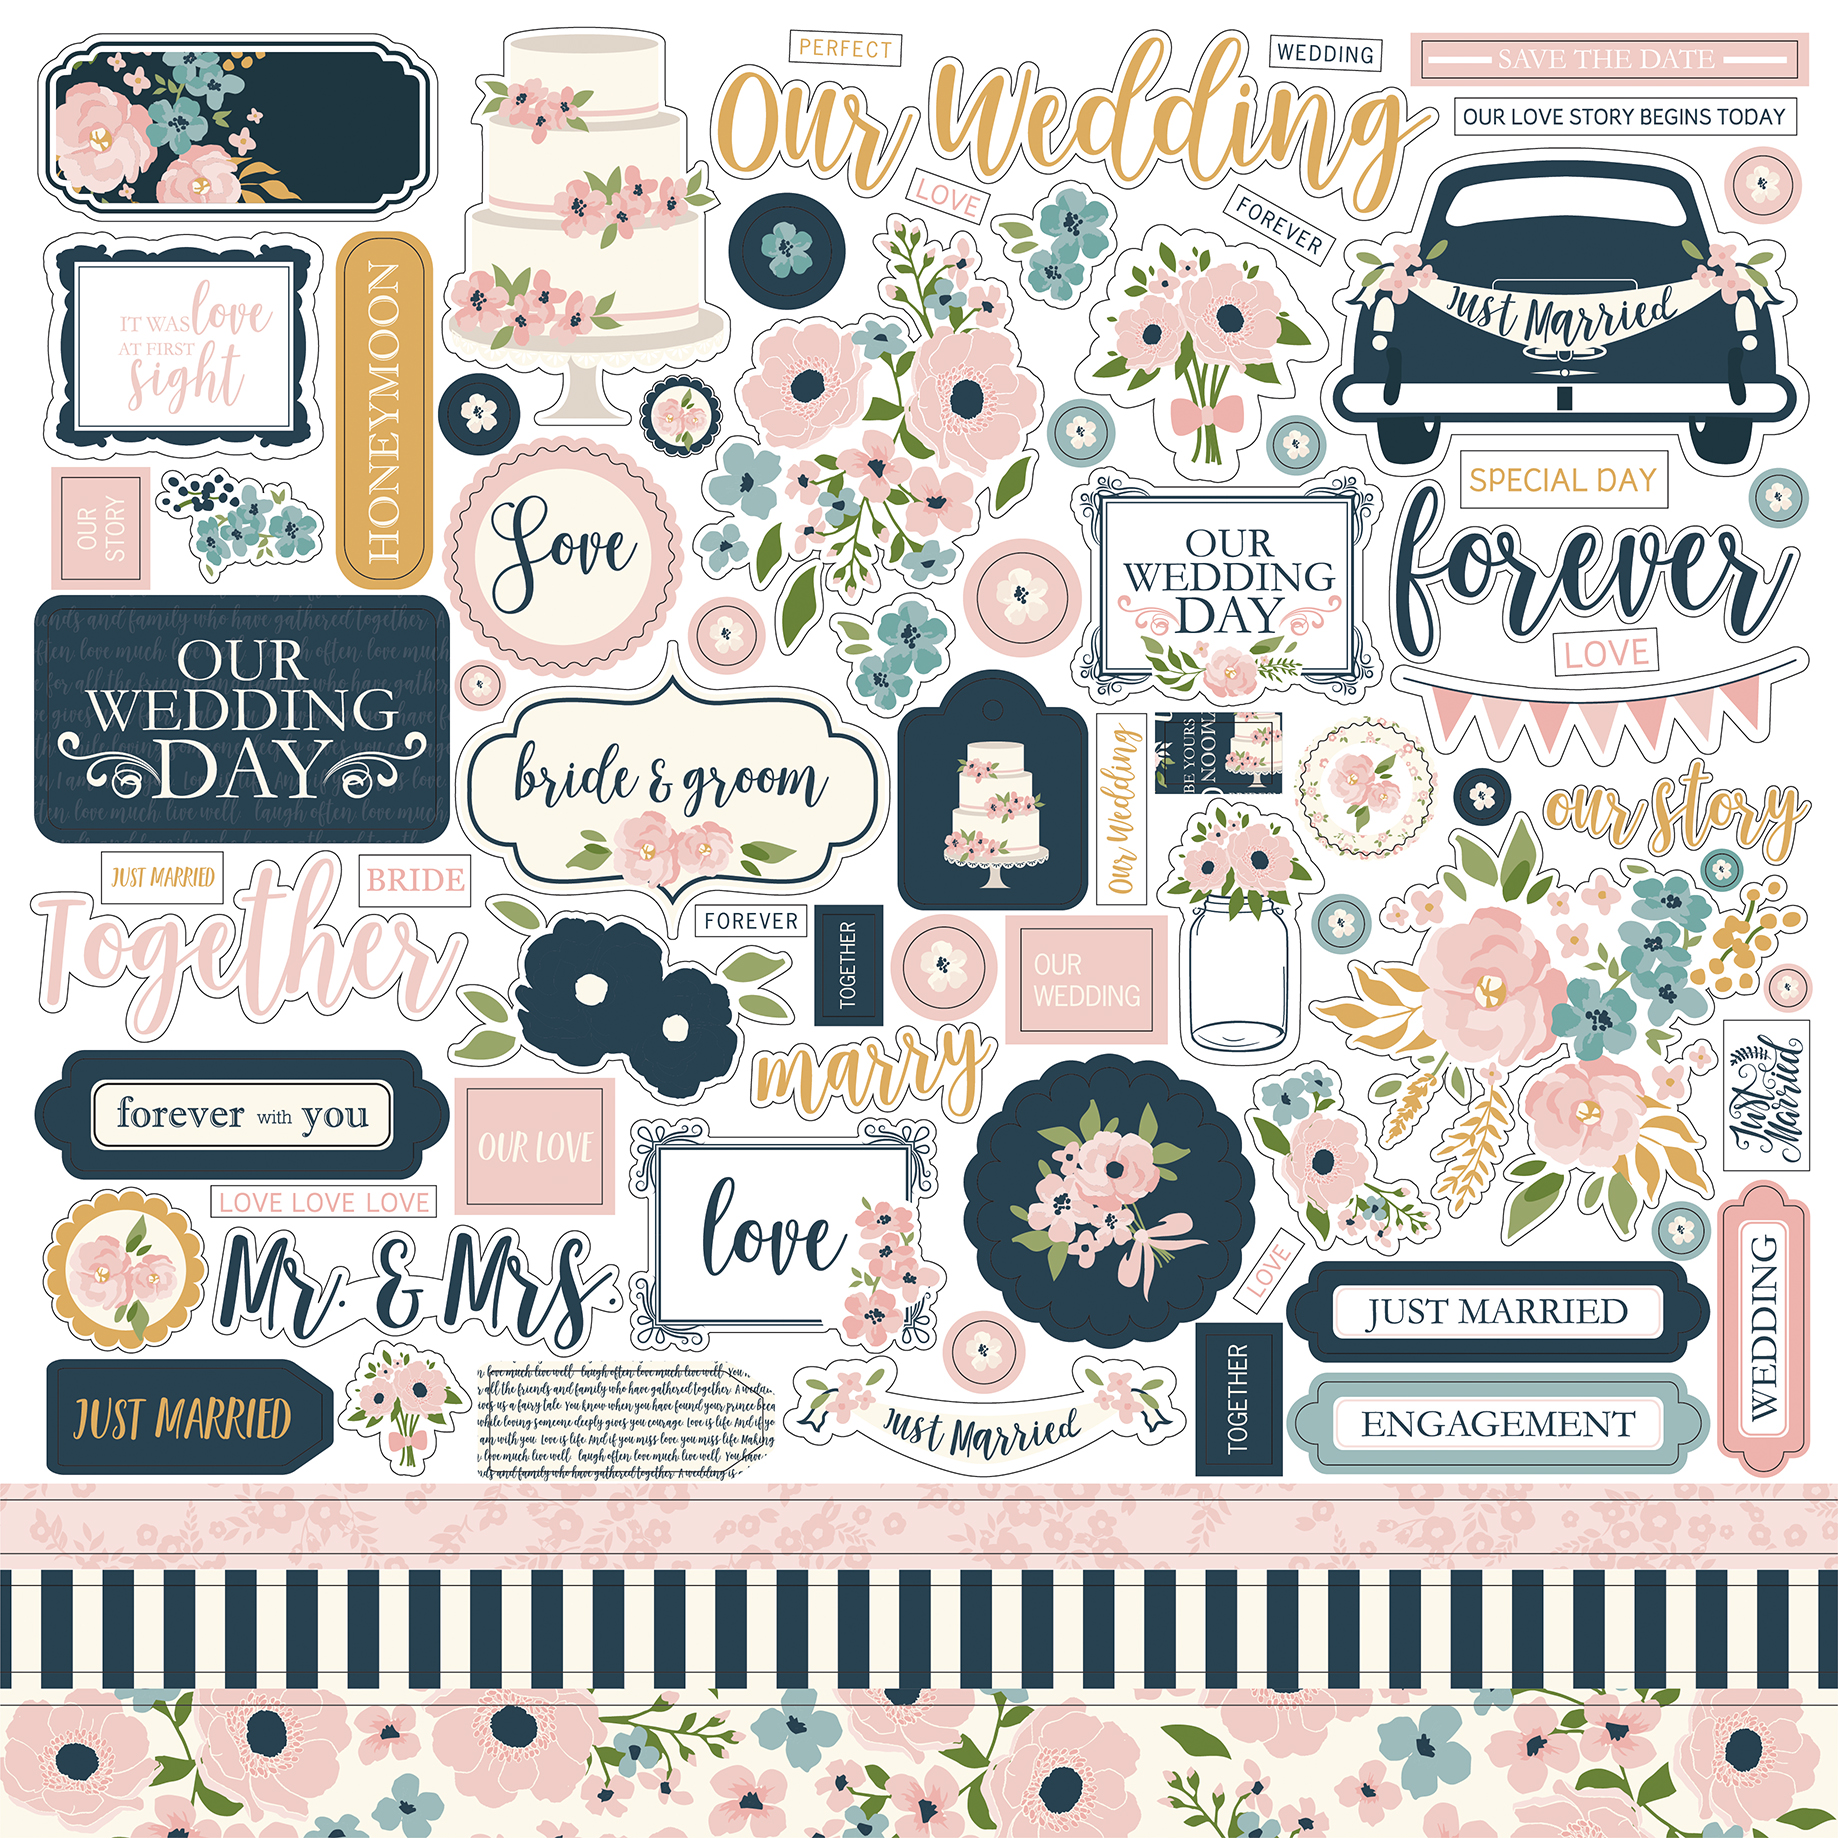 Echo Park Paper Company Wedding DAY Collection Element -  Hong Kong